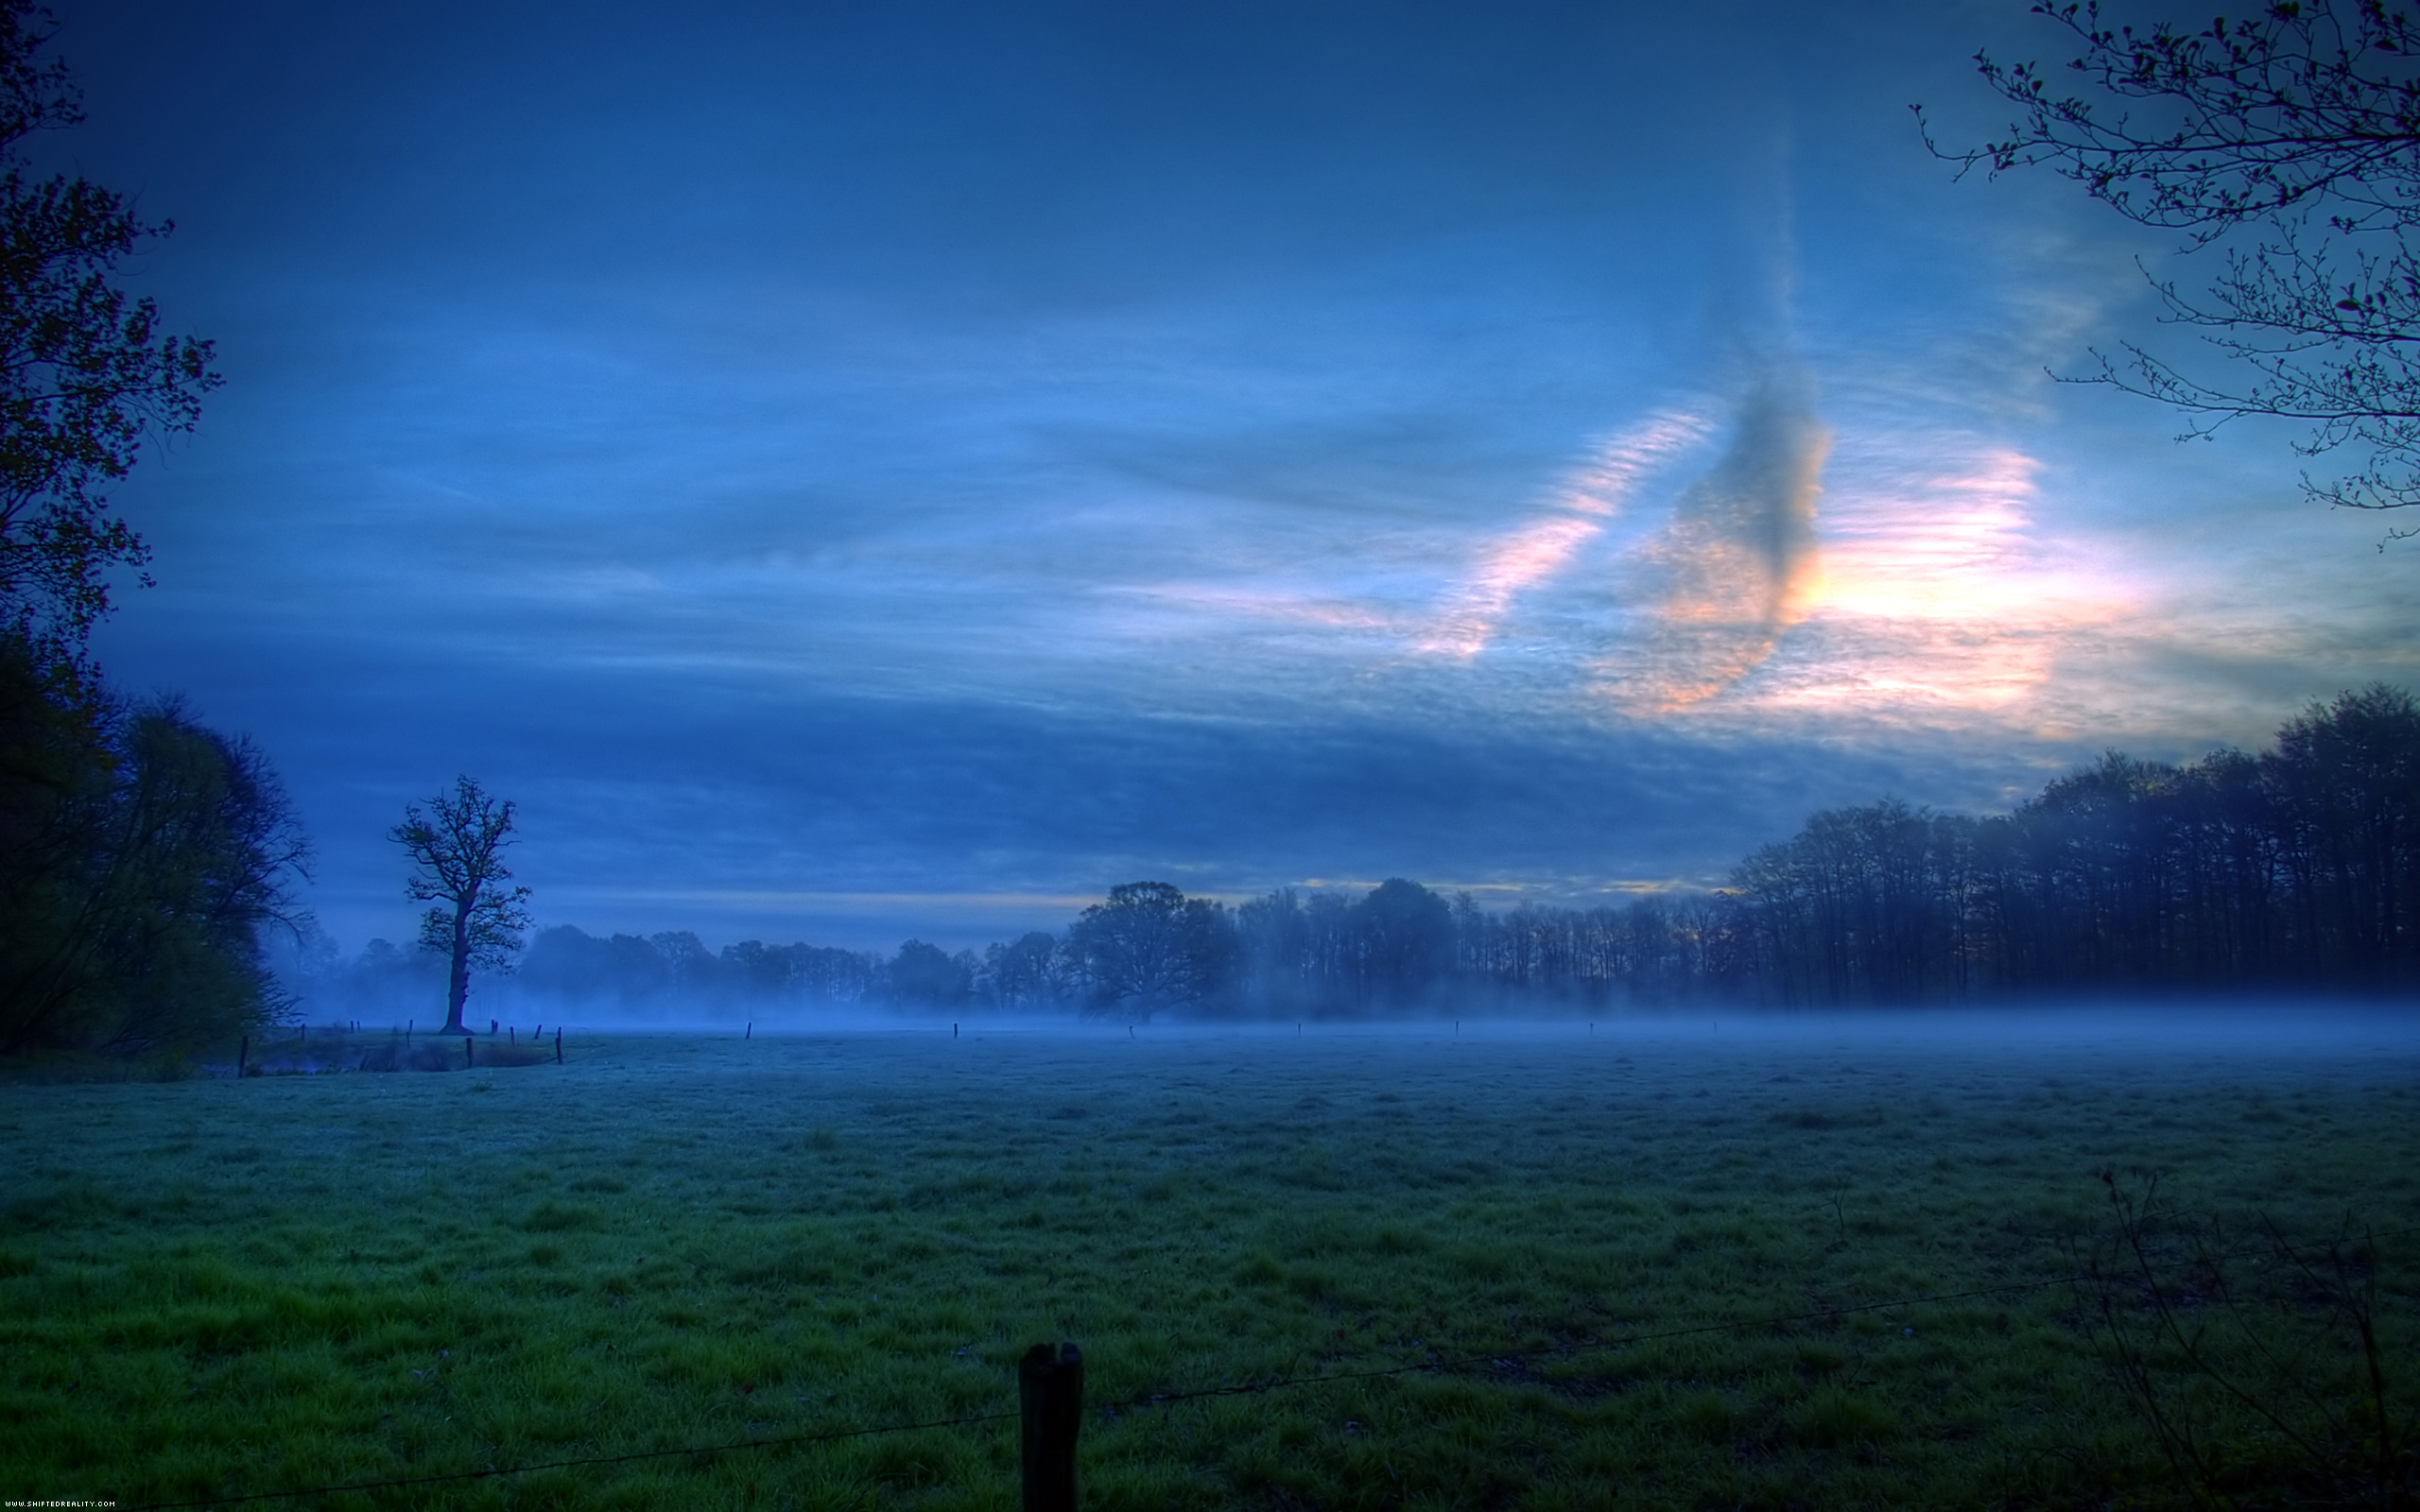 Desktop wallpaper: A serene nature scene at dusk, featuring a foggy field, a solitary tree, and greenery under cloudy skies.